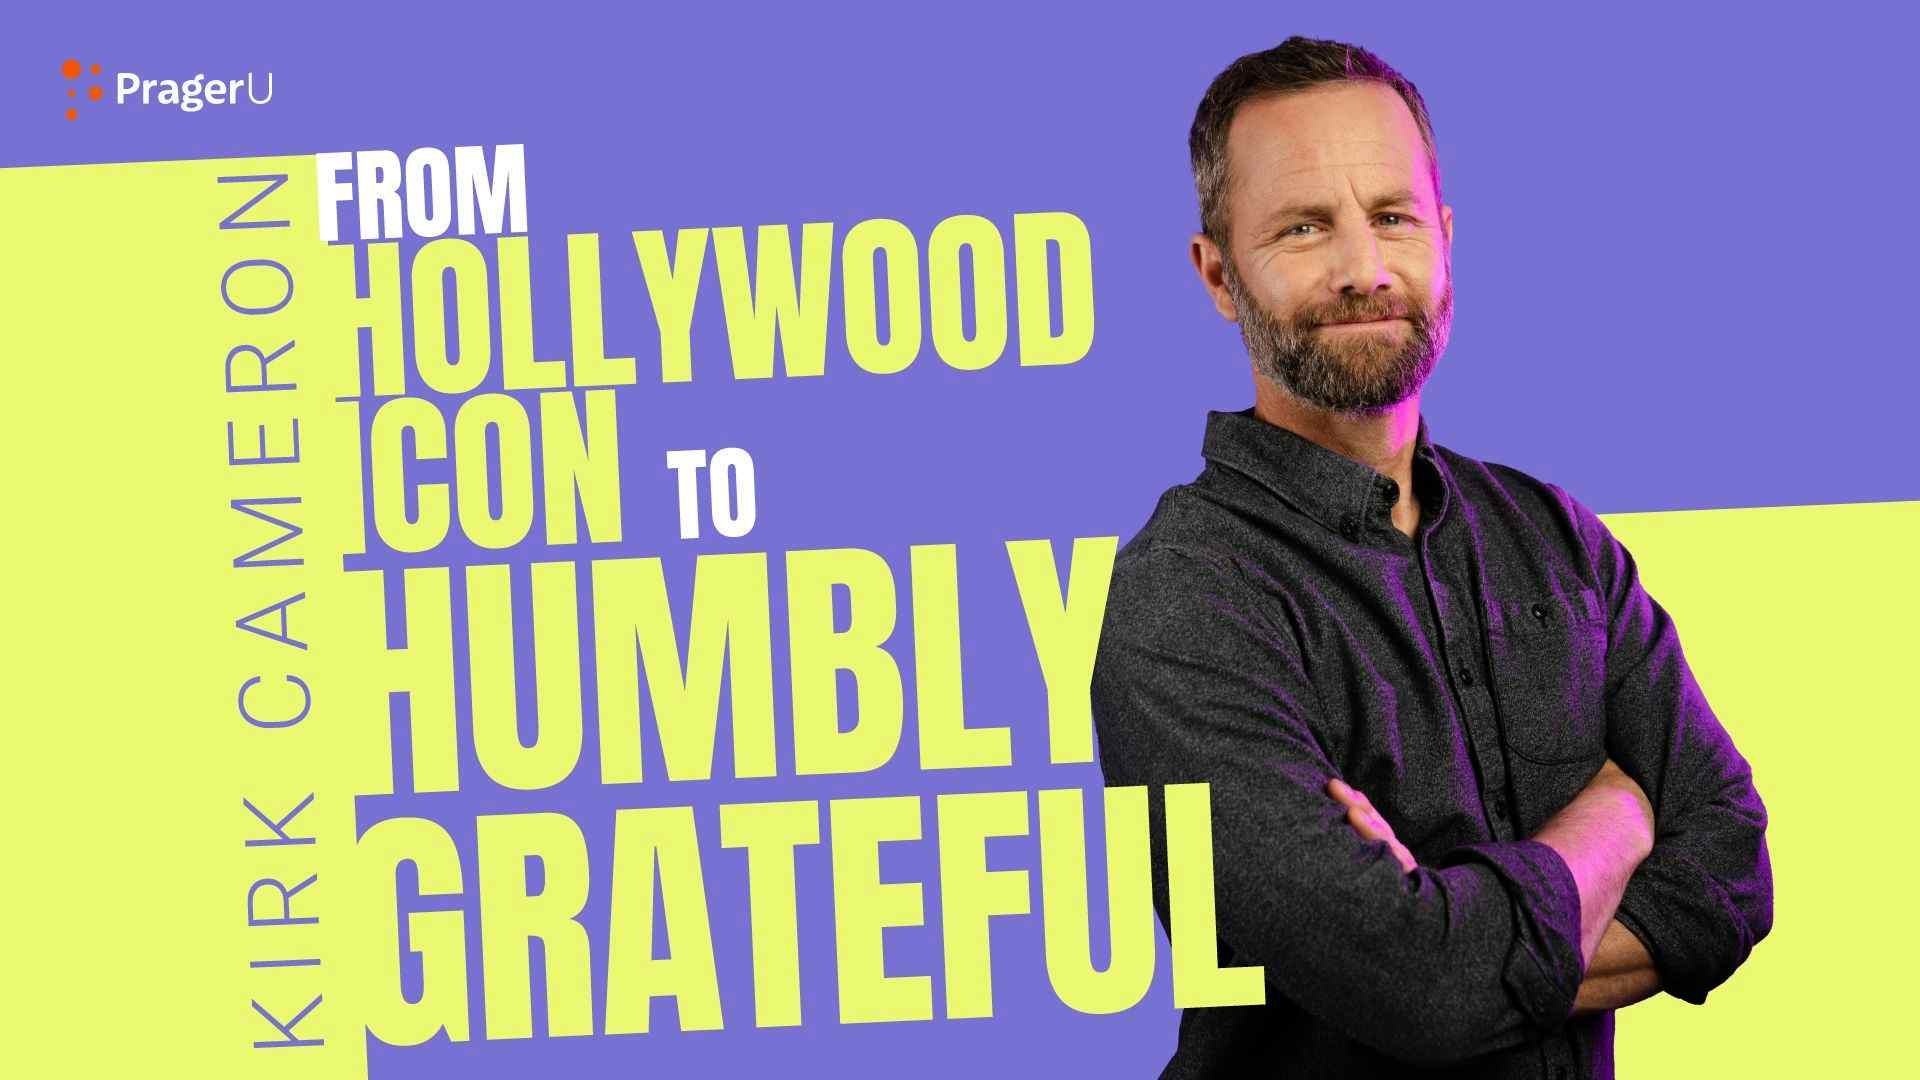 From Hollywood Icon to Humbly Grateful